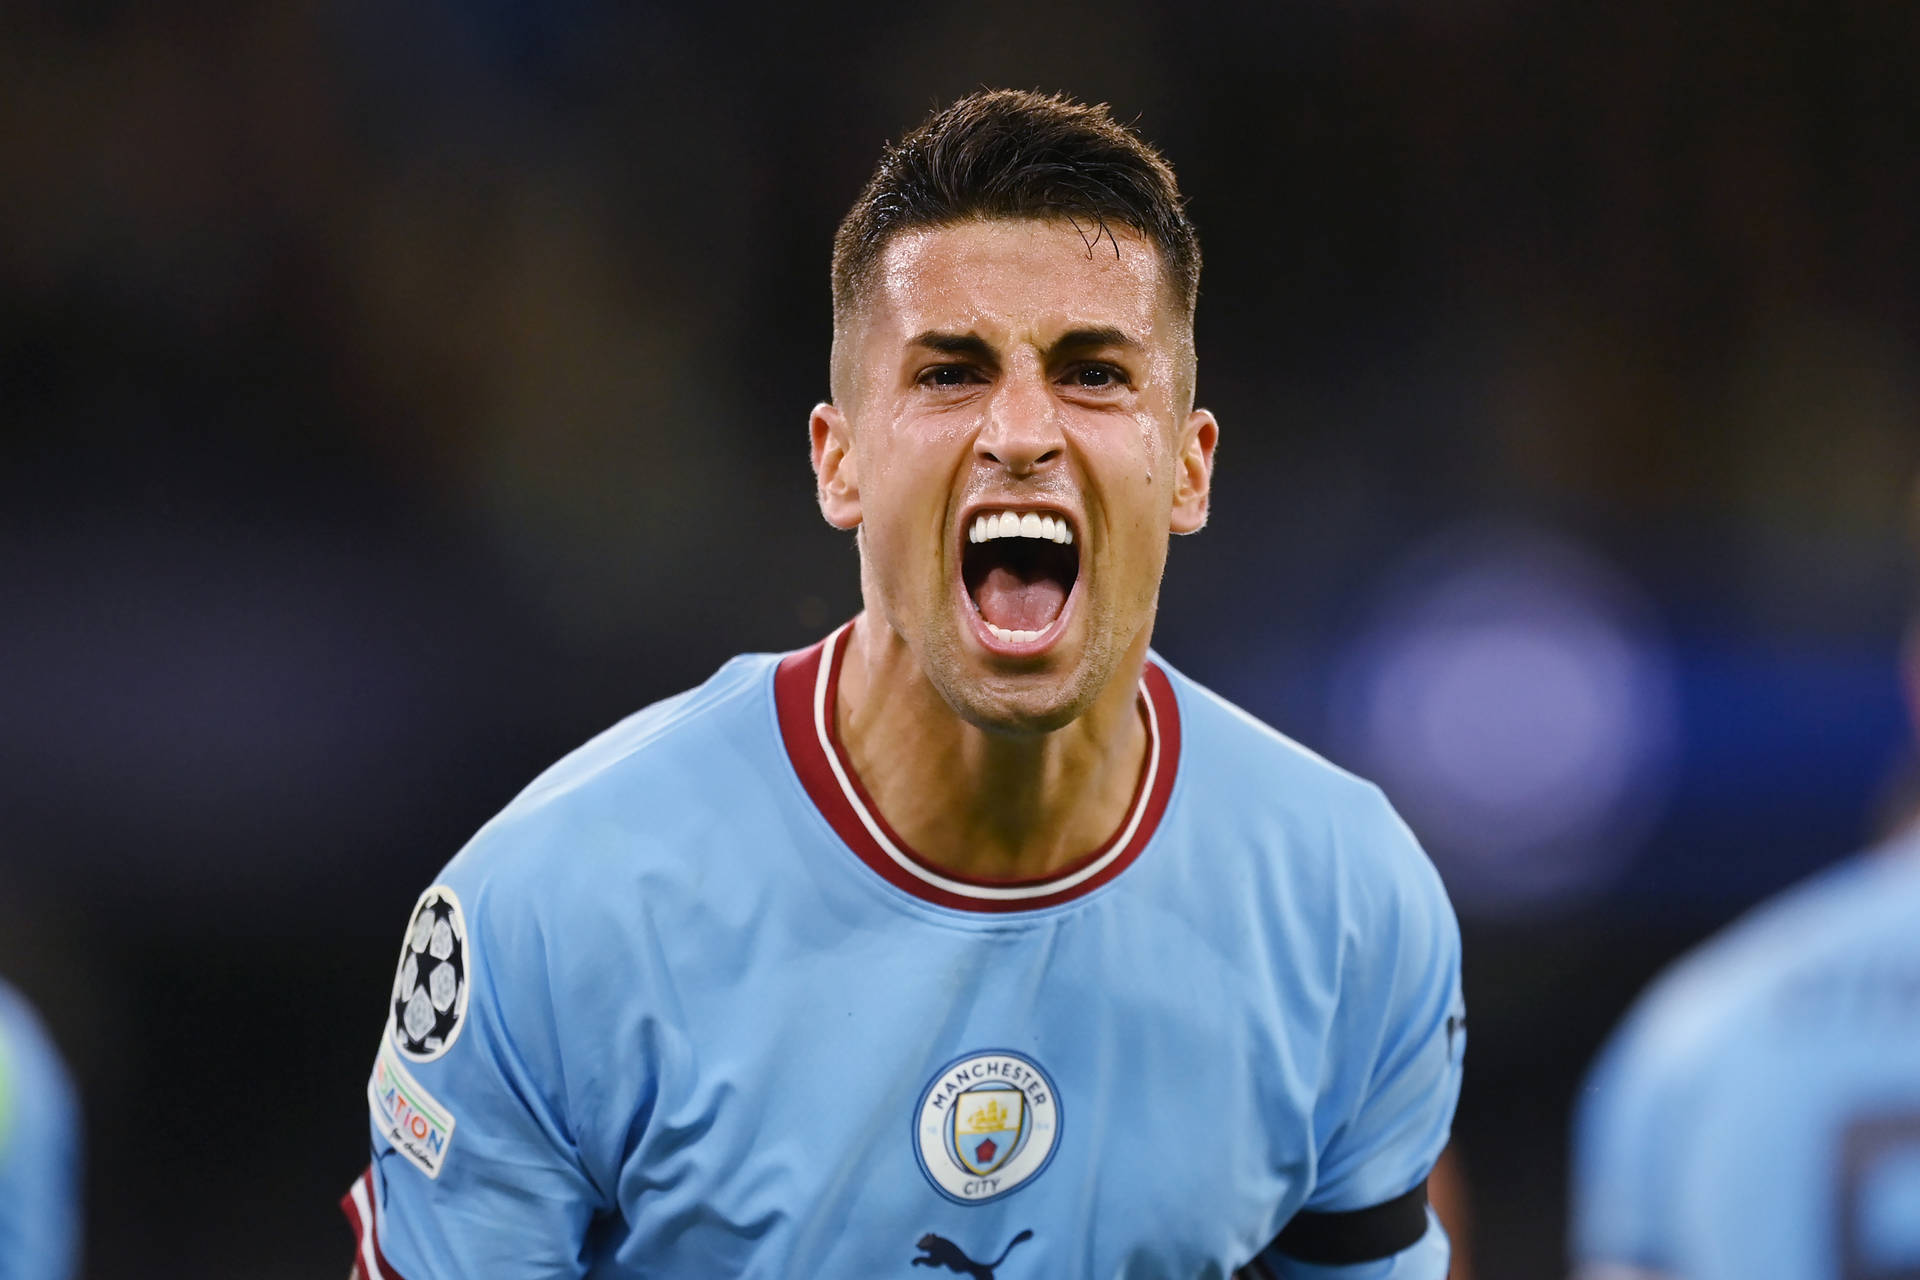 Joao Cancelo in Full Intensity on the Football Pitch Wallpaper